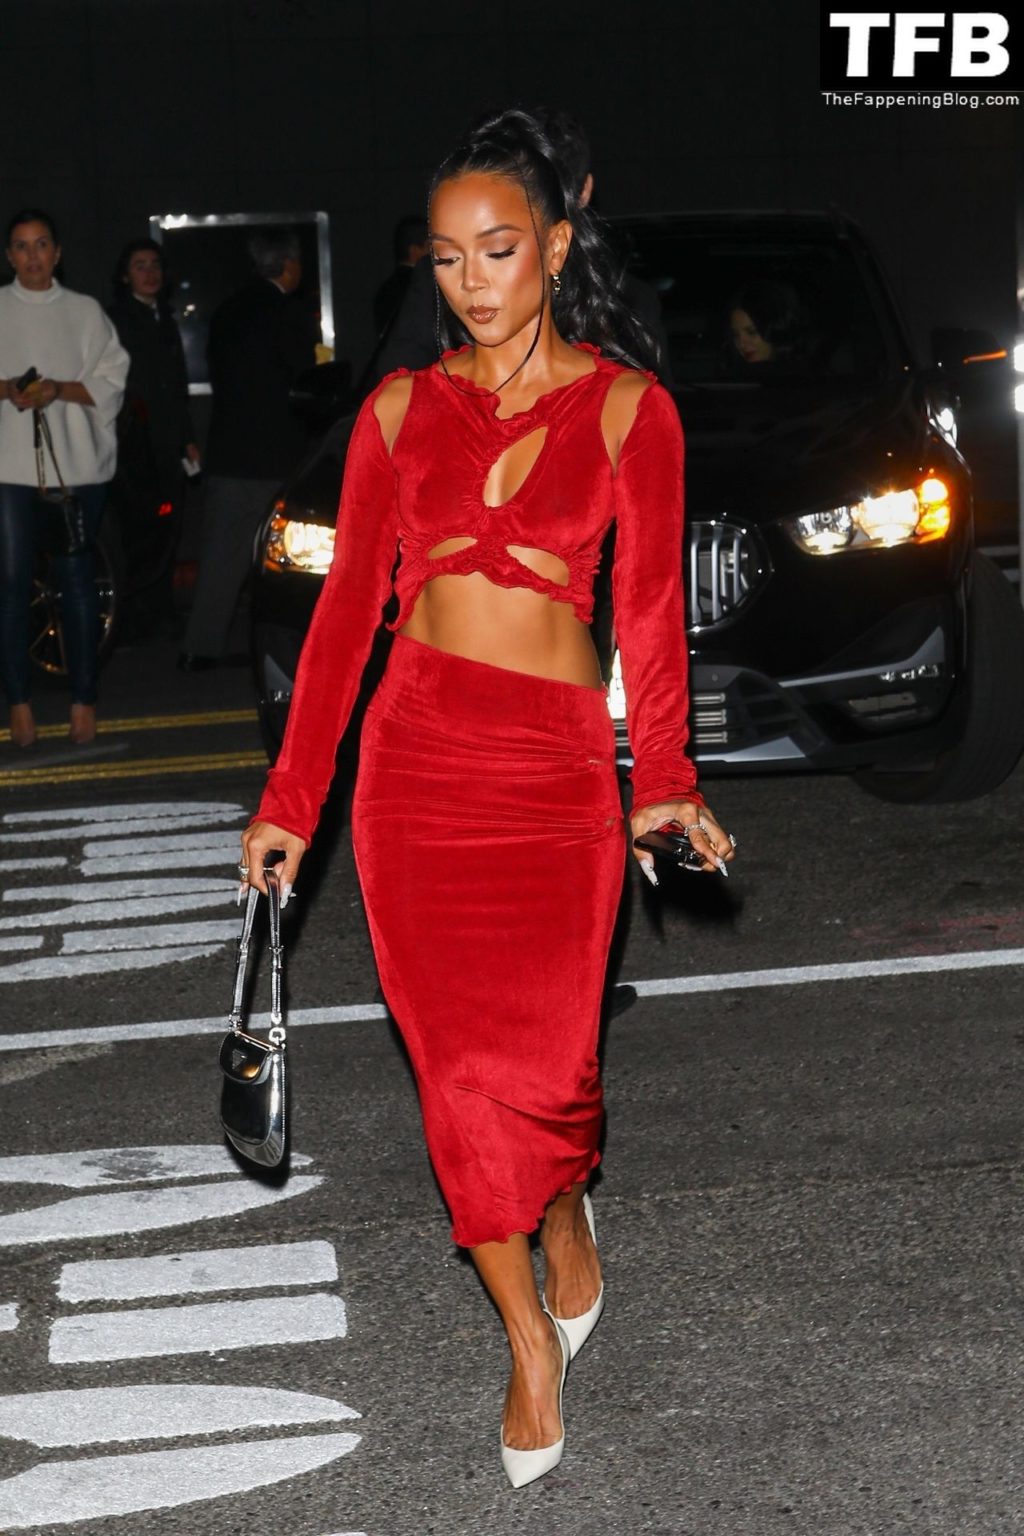 Karrueche Tran Sexy The Fappening Blog 50 1024x1536 - Karrueche Tran Shows Her Pokies in a Red Dress at The Hollywood Reporter’s Oscar Nominees Night (68 Photos)